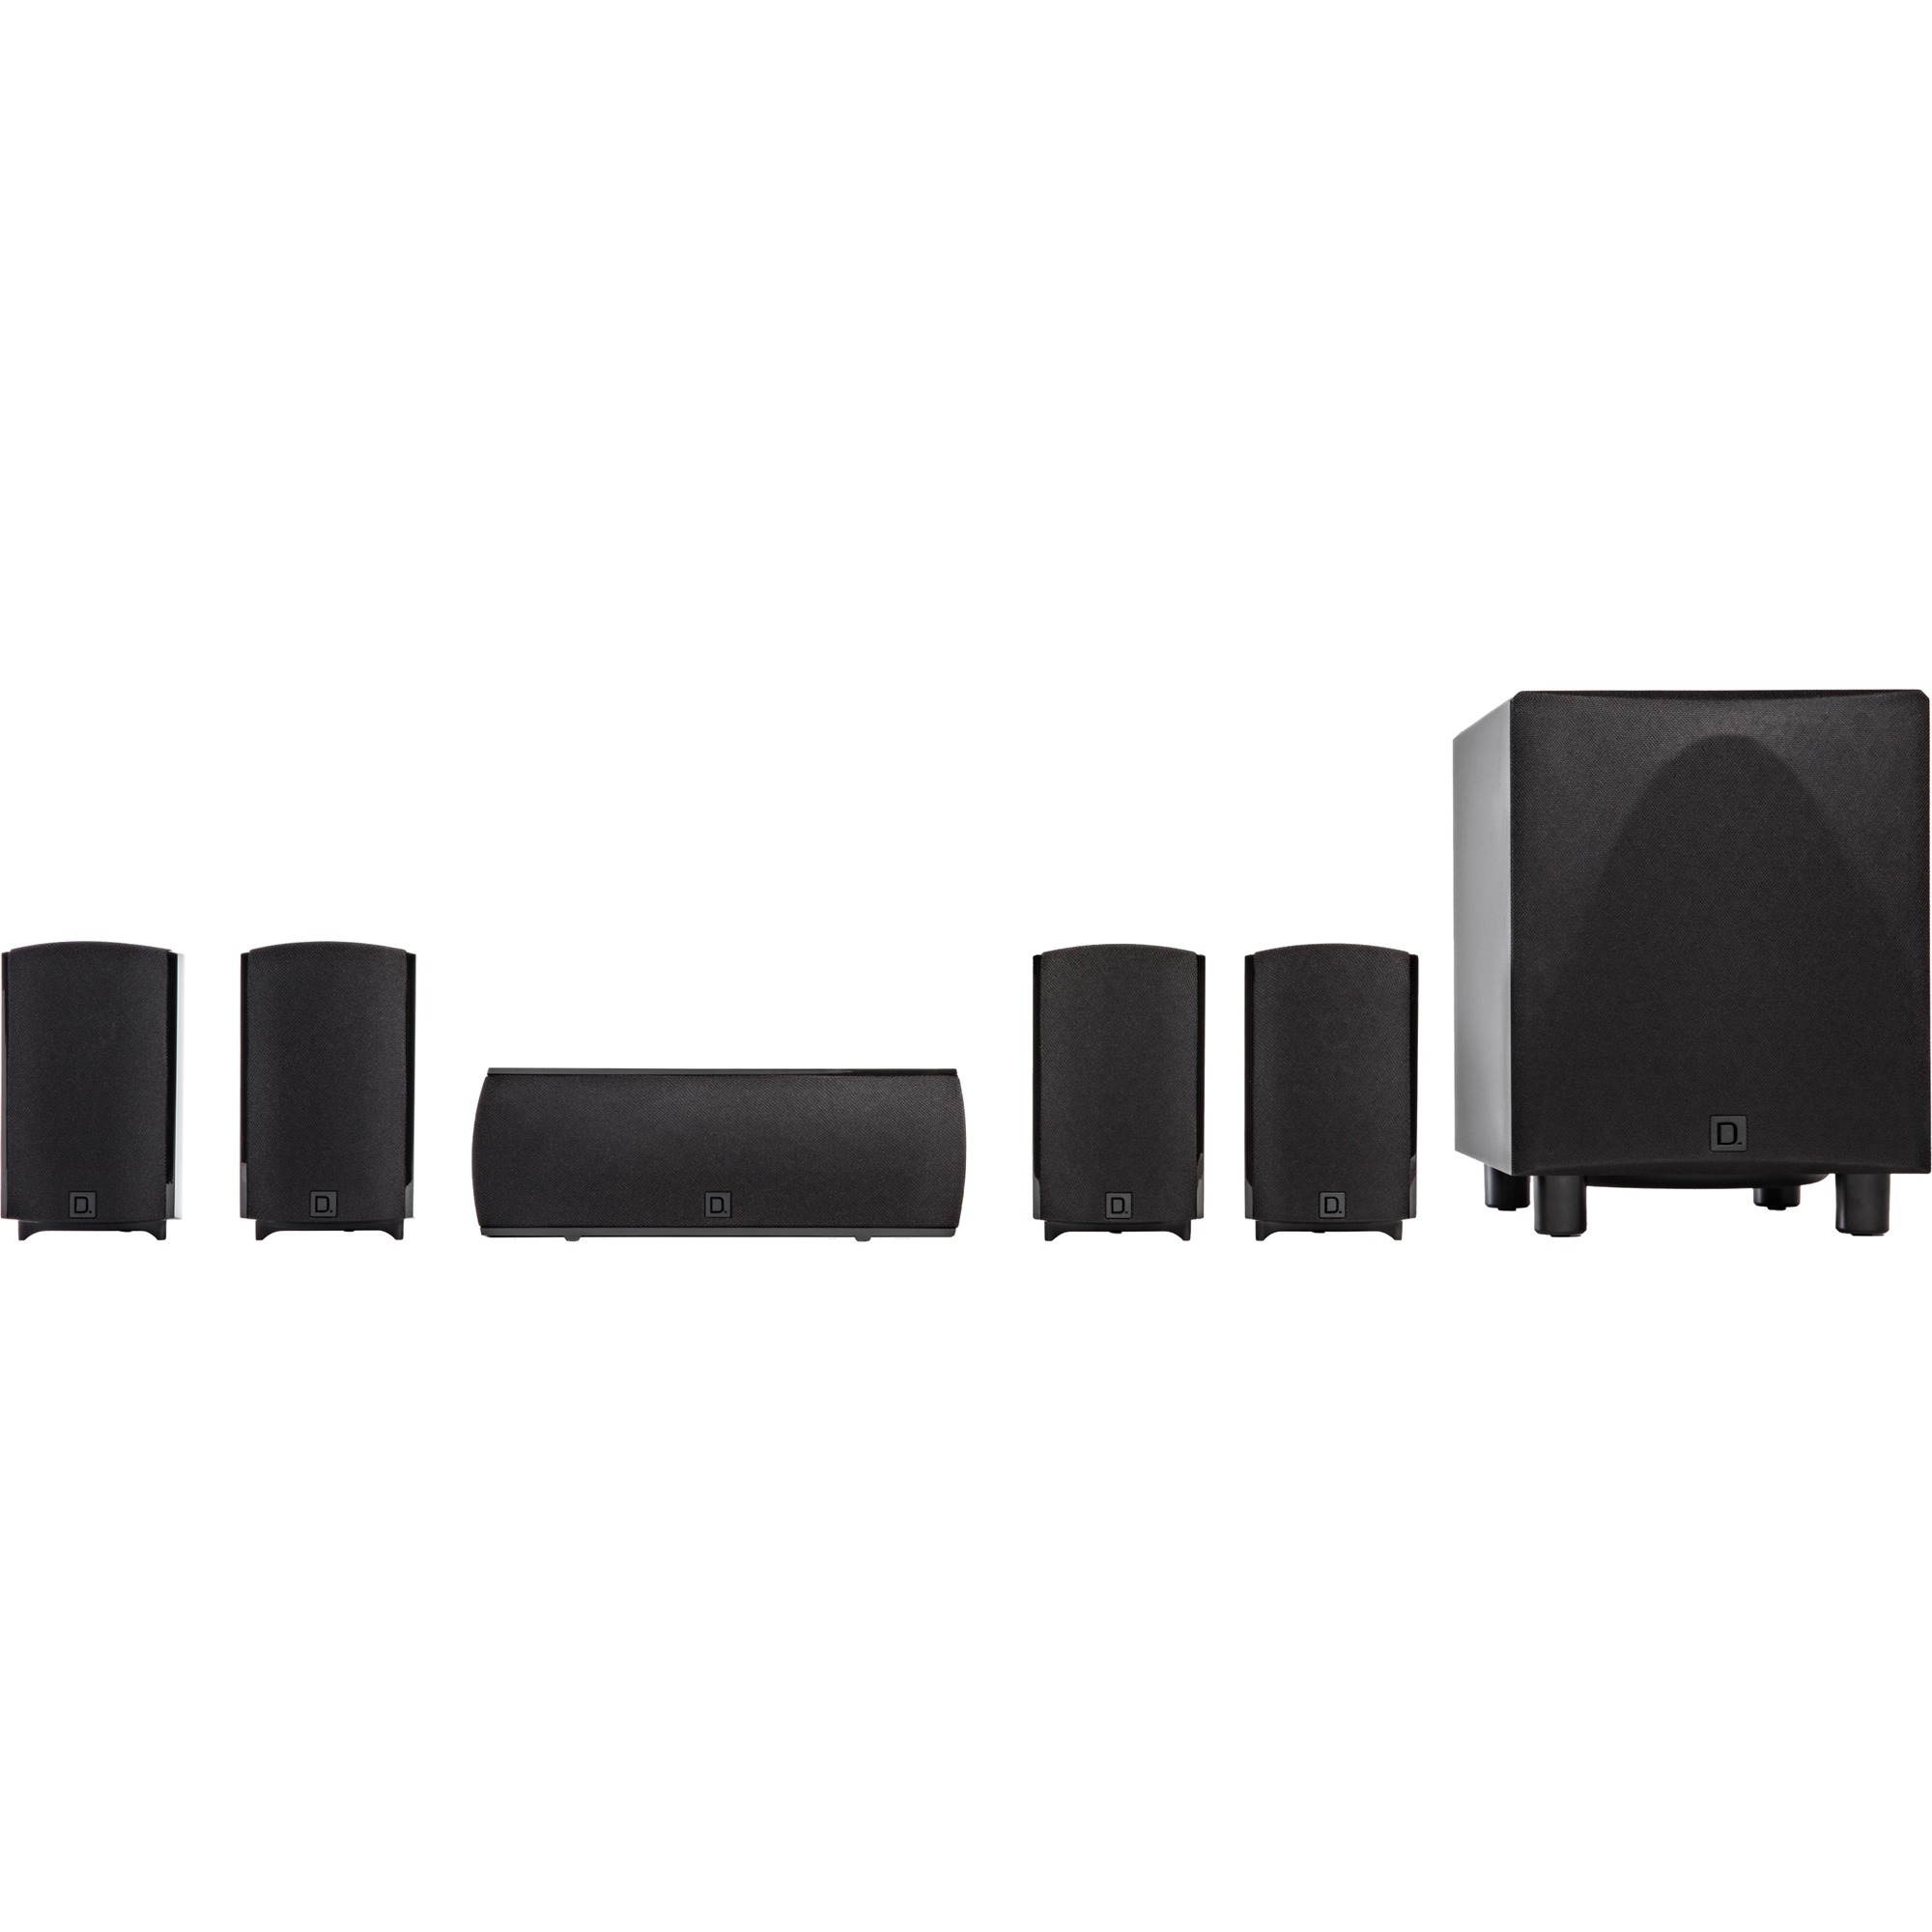 ProCinema Series 5.1 Channel High-Performance Compact Surround Sound System - image 3 of 17